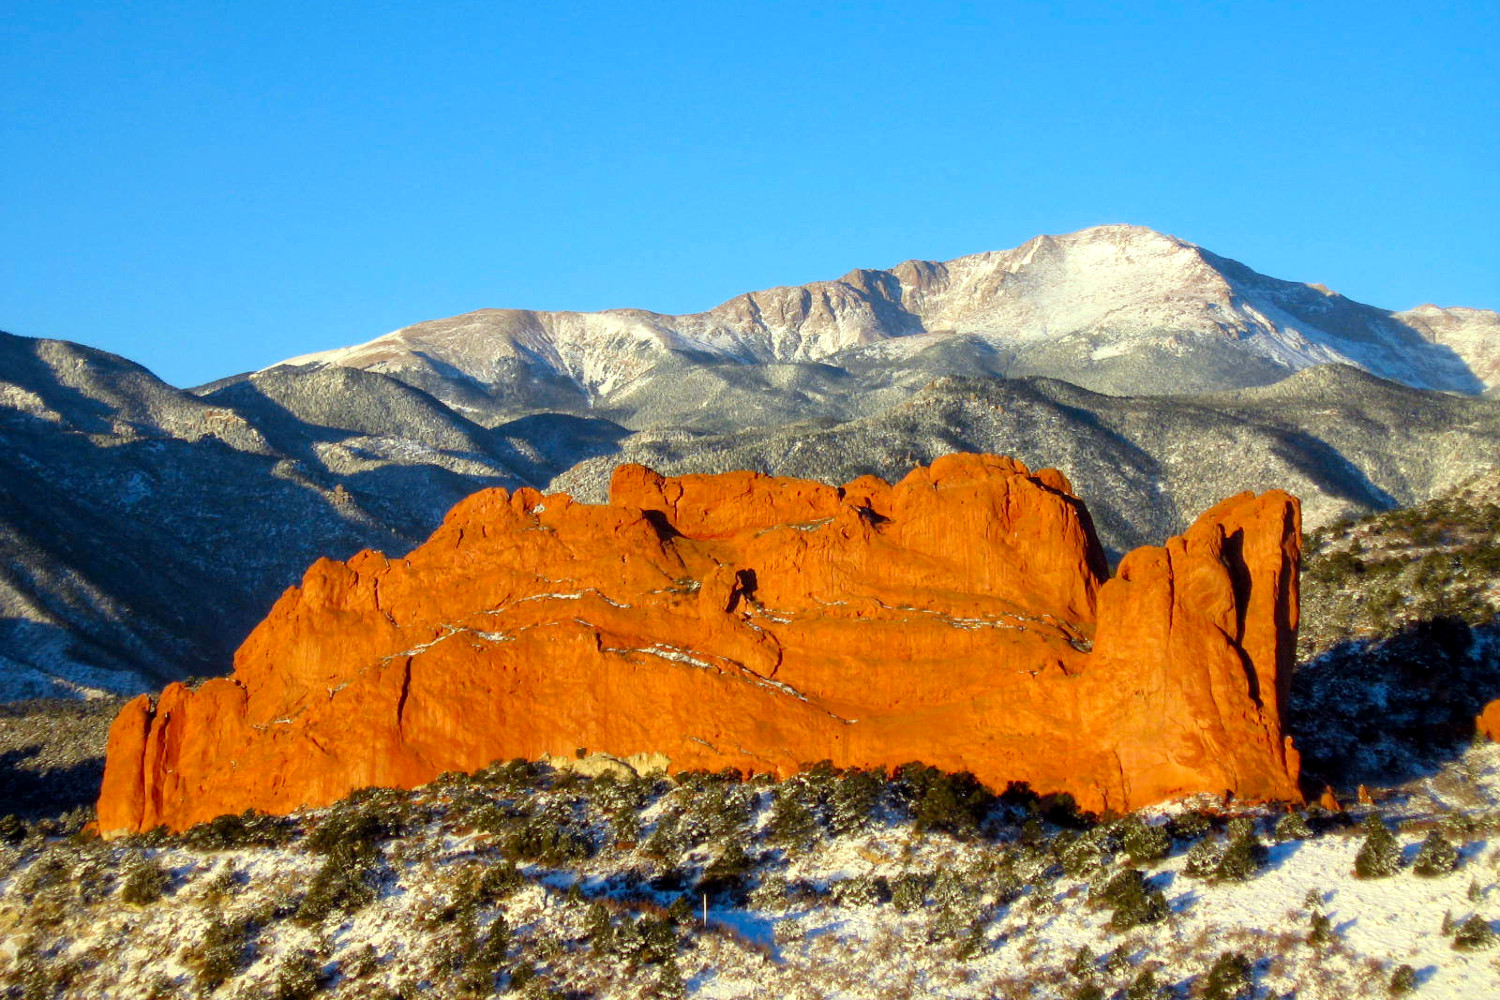 Pikes Peak and Garden of the Gods